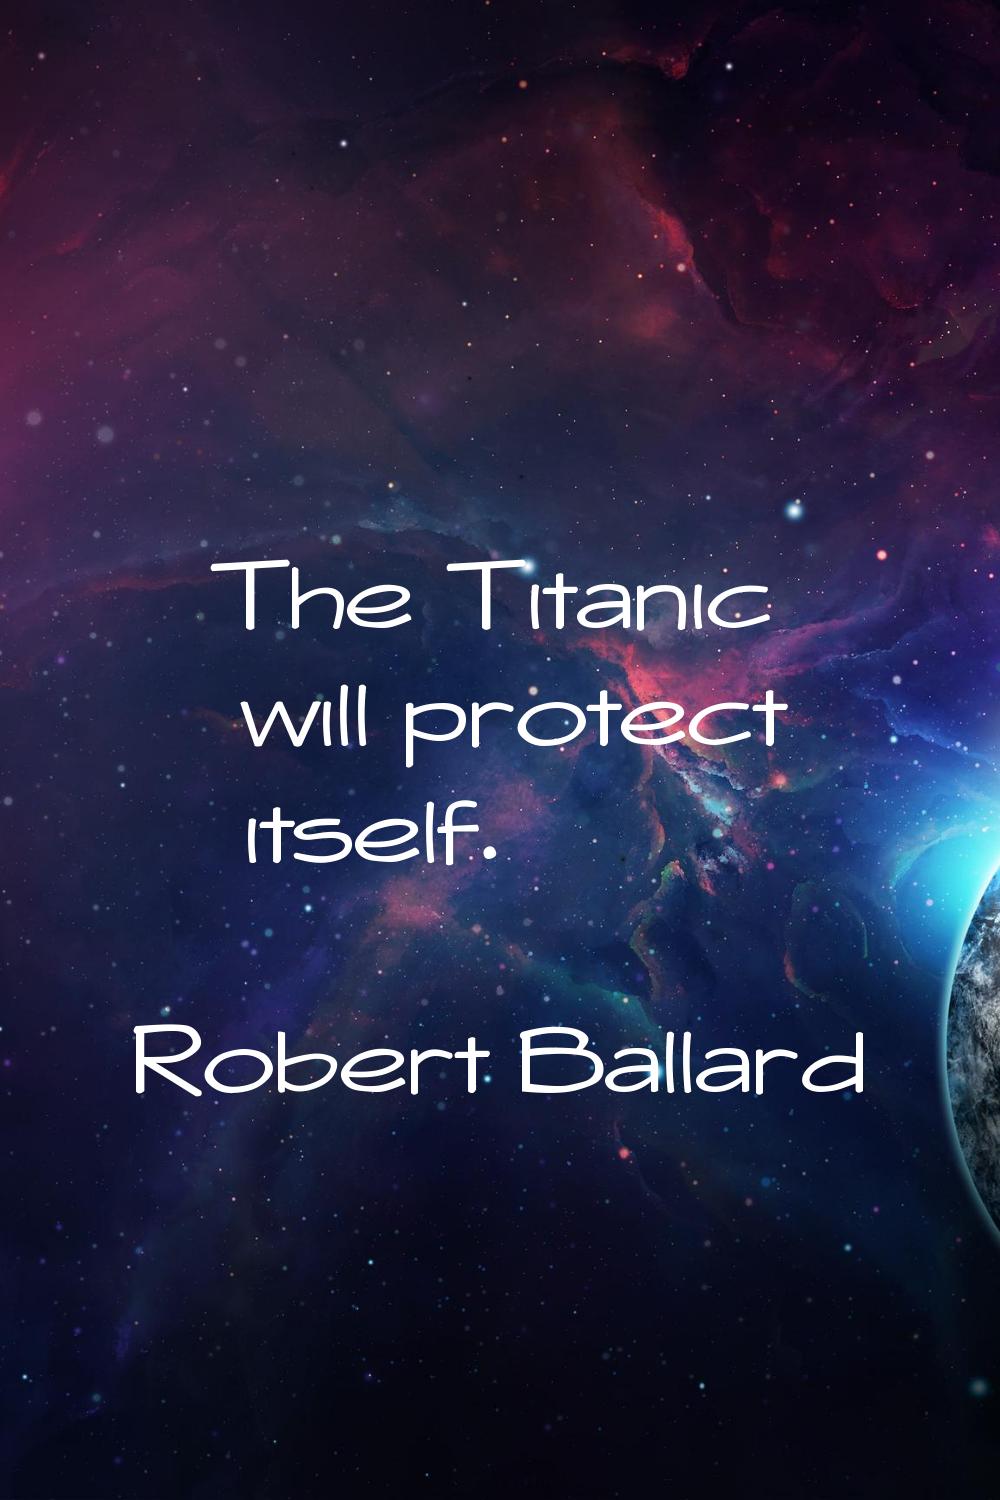 The Titanic will protect itself.